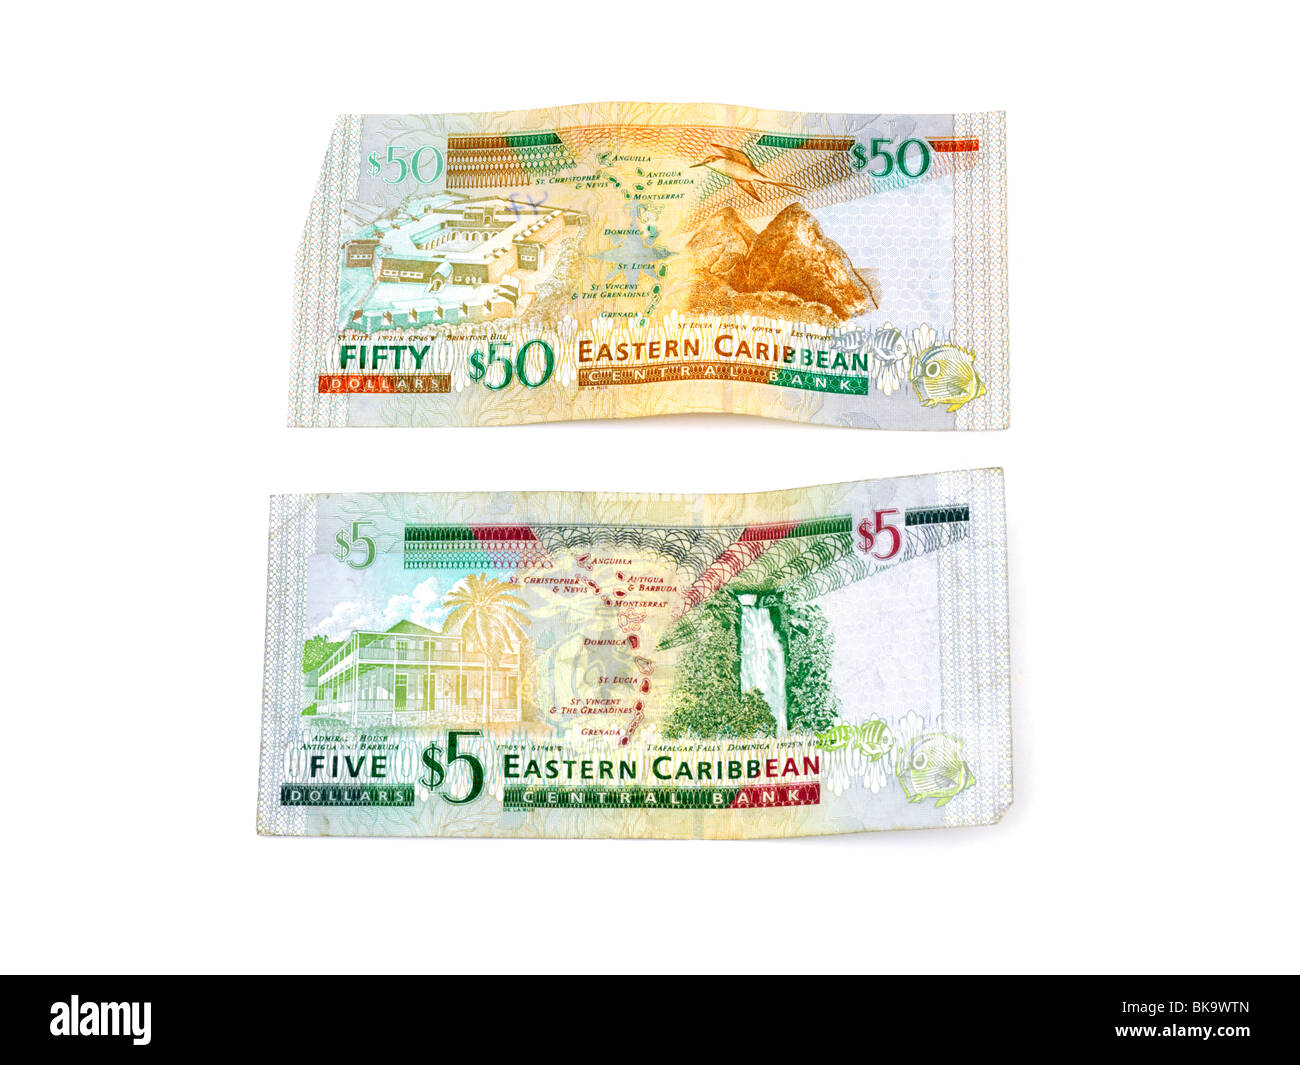 Eastern Caribbean Banknotes 5 And 50 Dollars Stock Photo